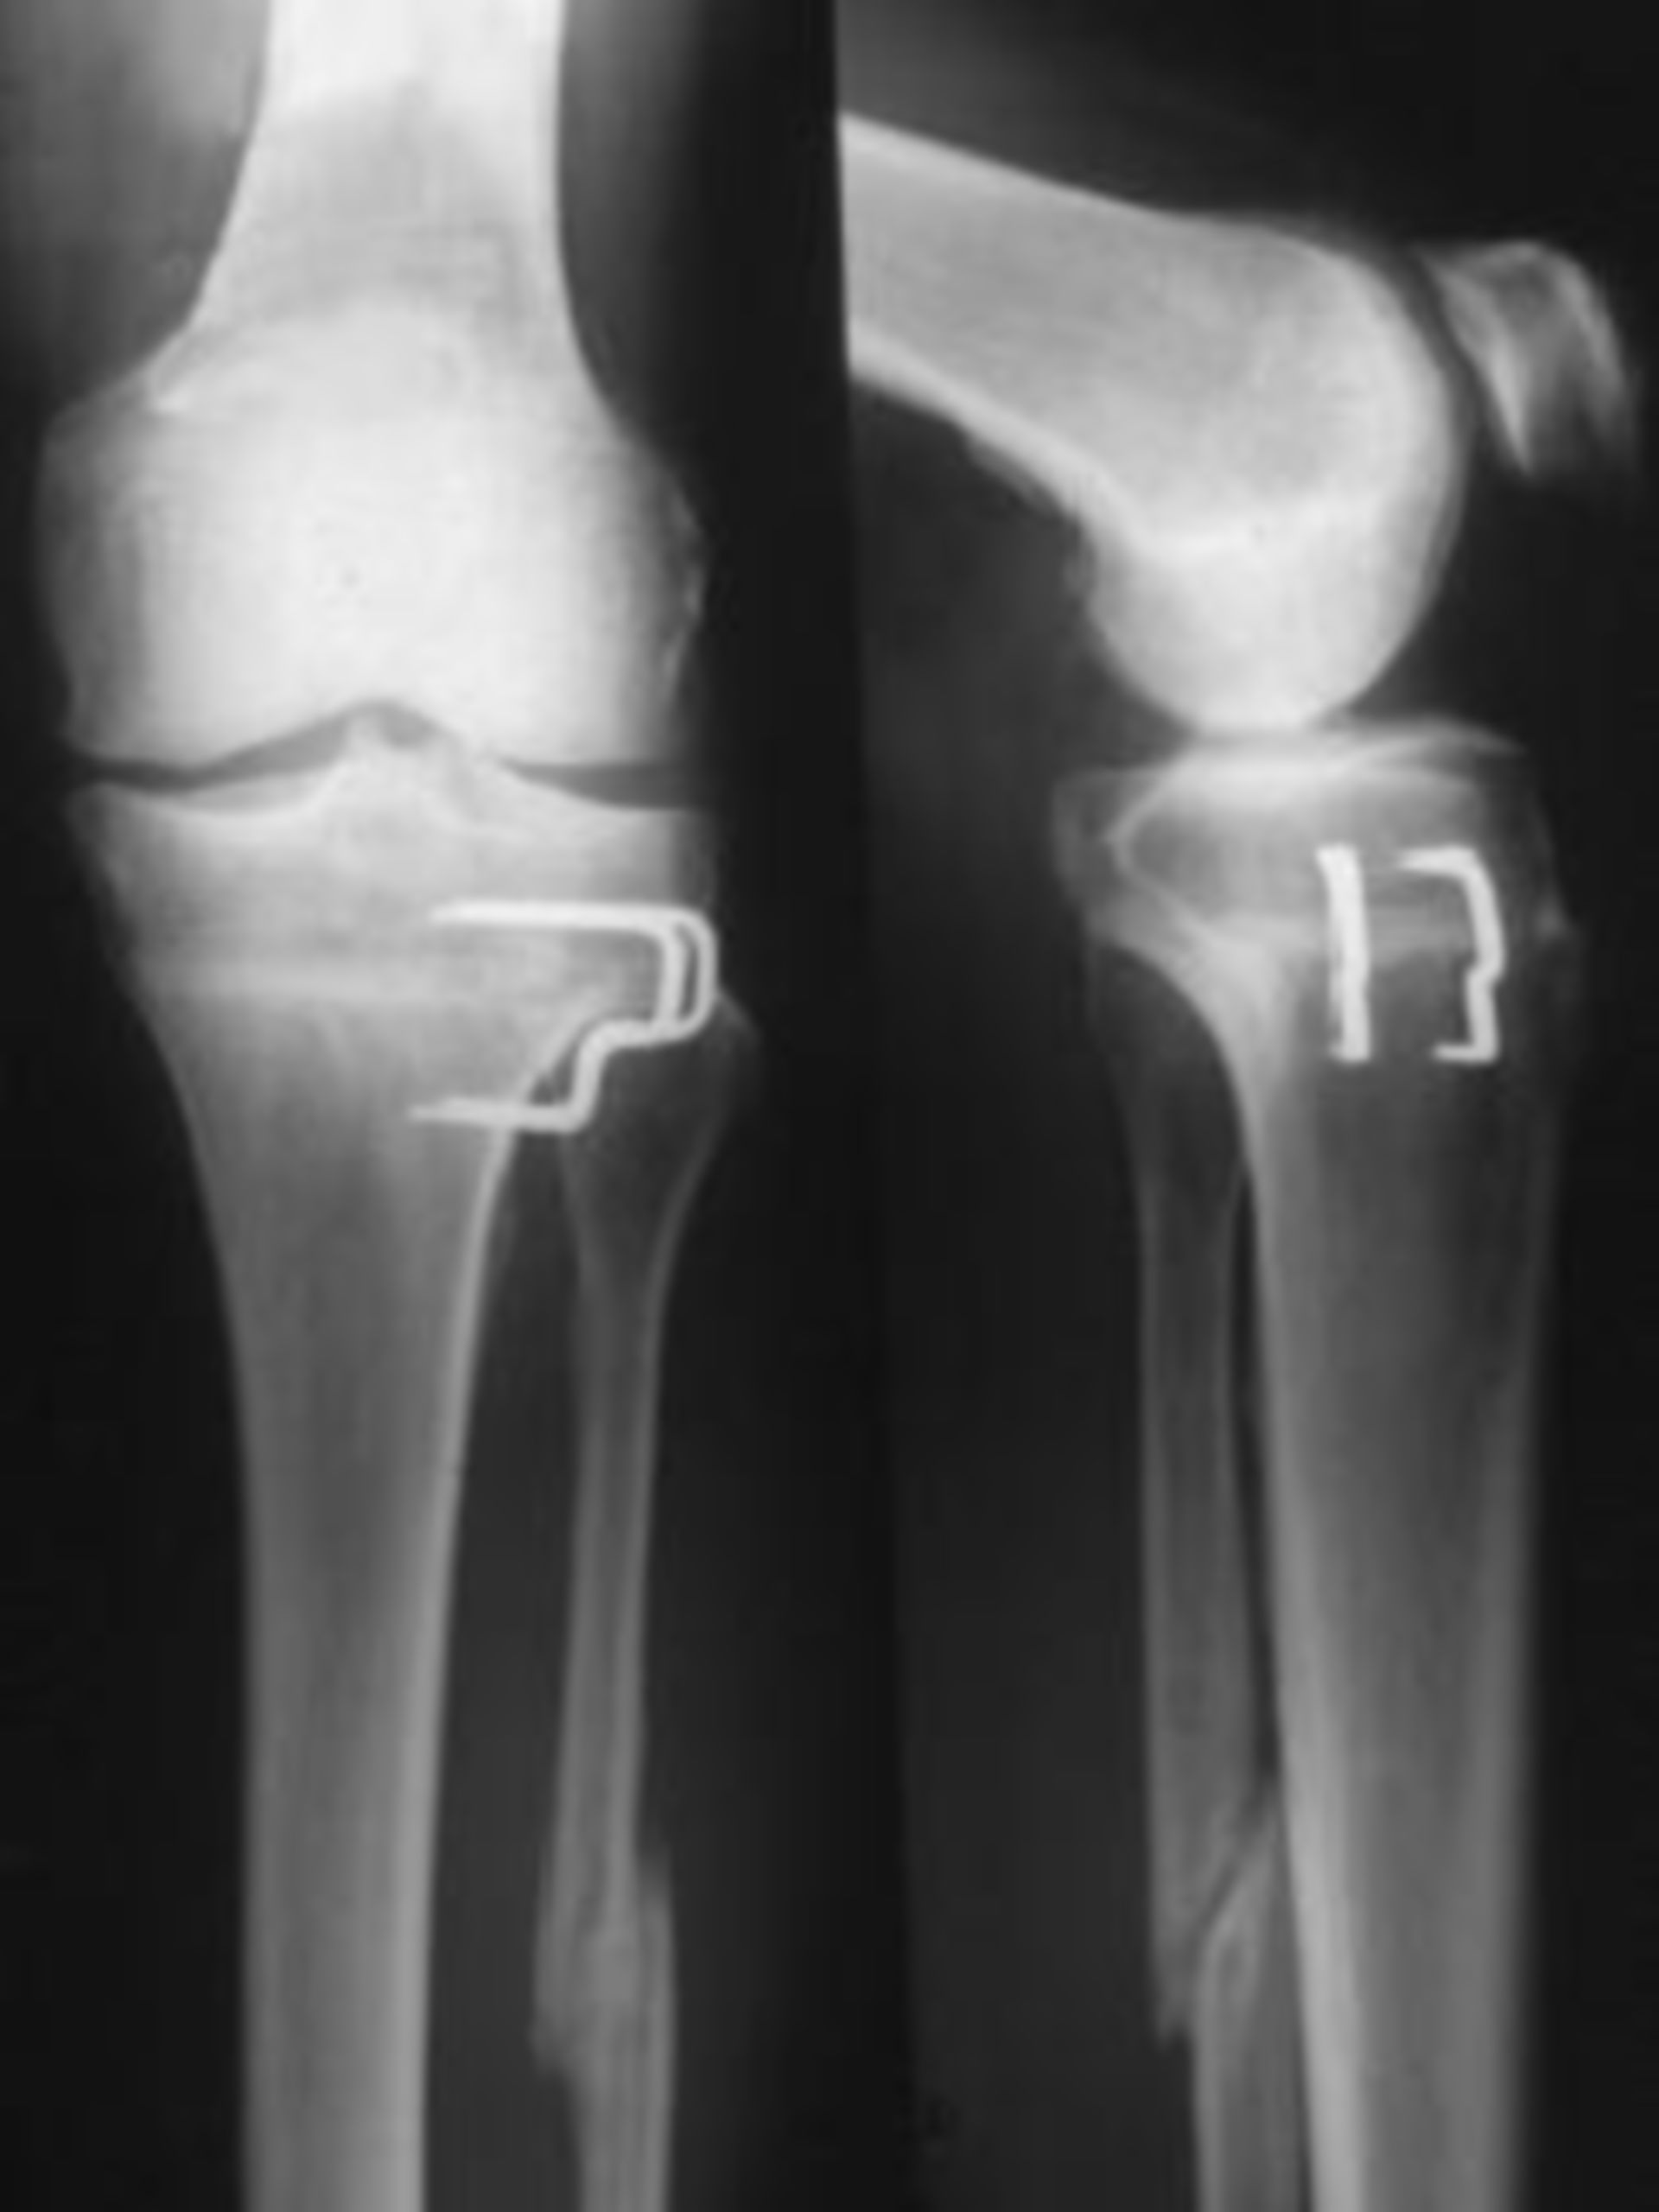 Correction of the knee joint axis at O-leg (genus varum)